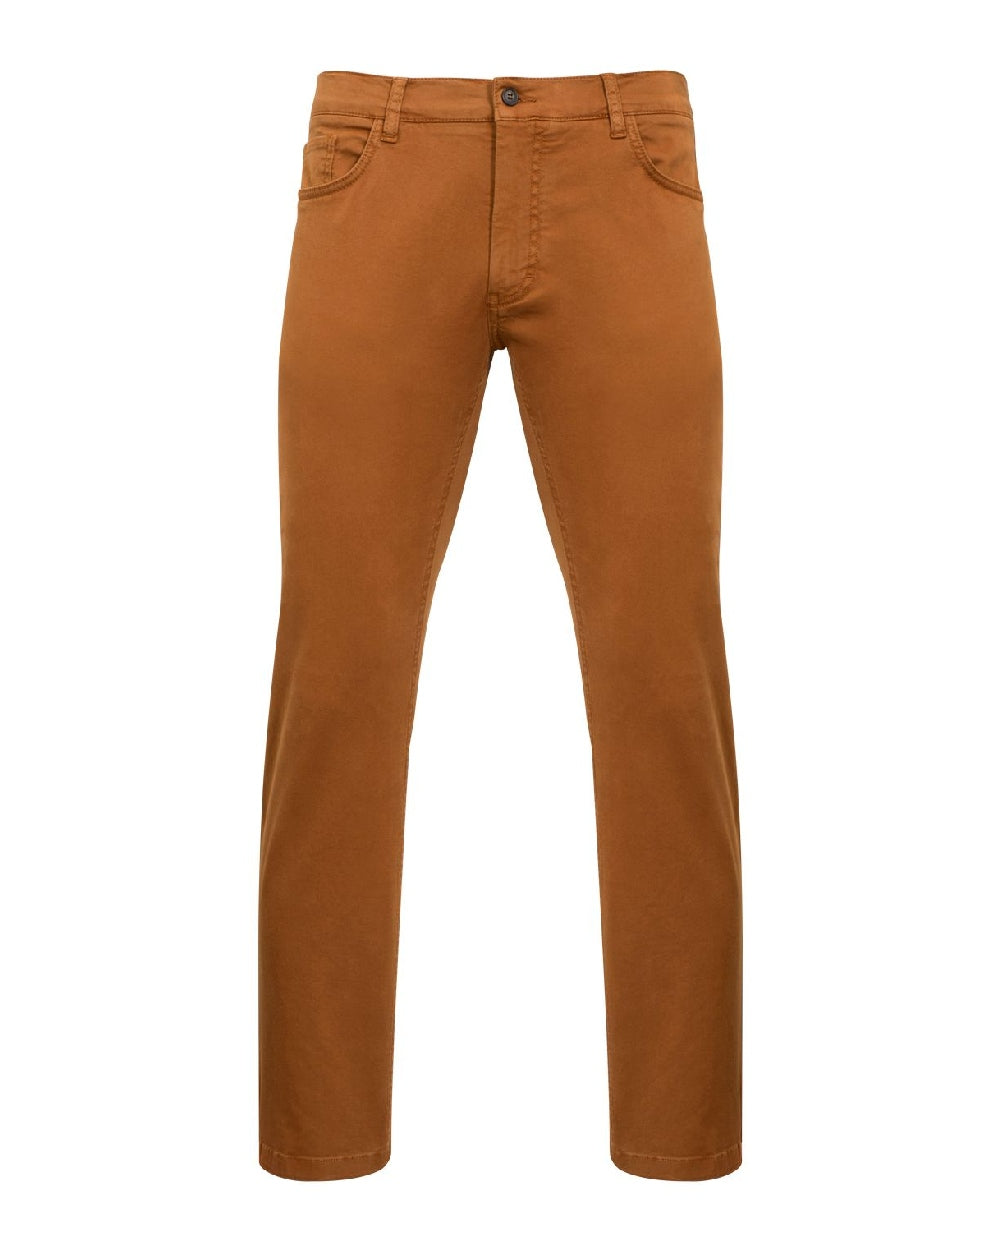 Alan Paine Mens Cheltham Chino Jeans in Tobacco 